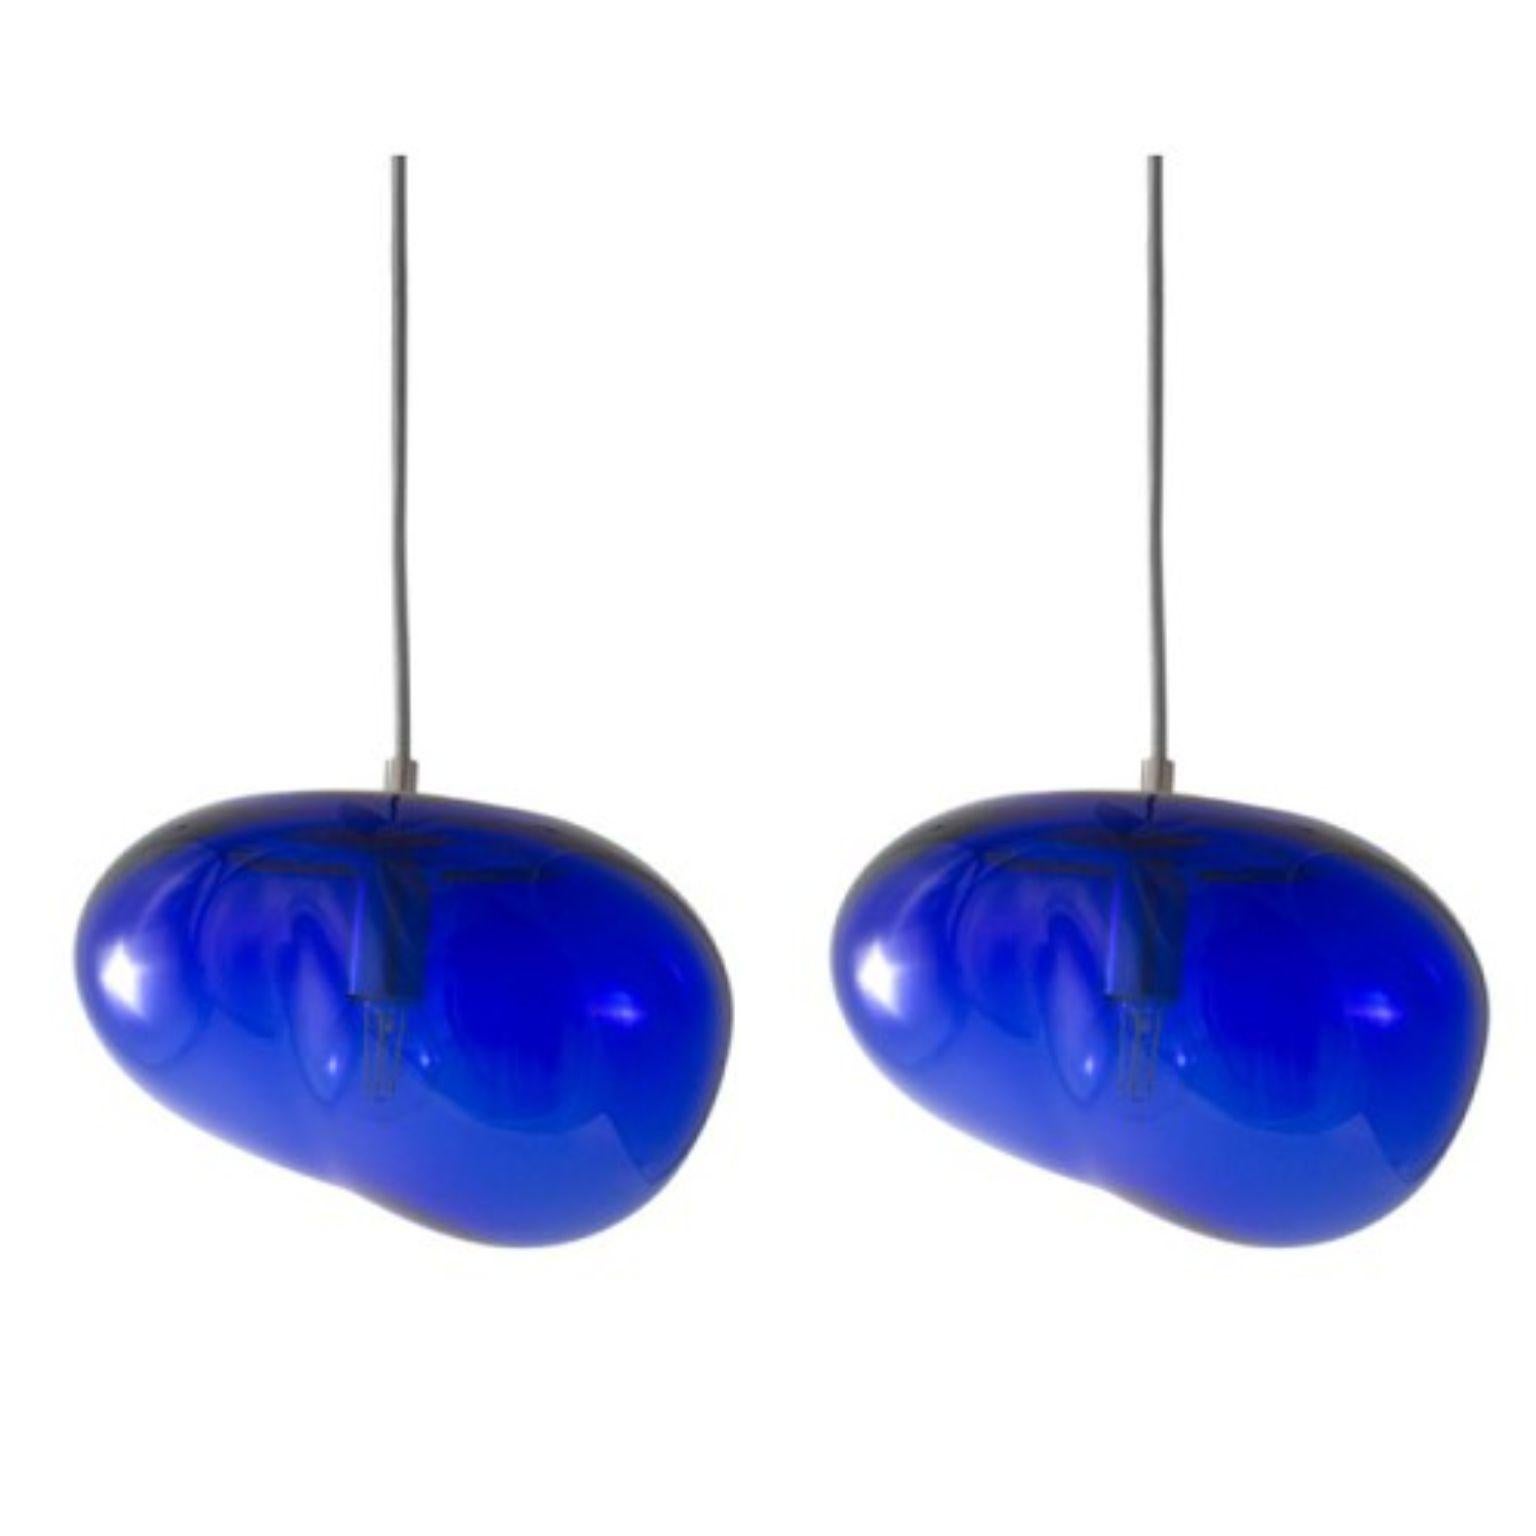 Set of 2 planetoide saiki blue pendants by Eloa.
No UL listed 
Material: glass, steel, silver,, LED bulb.
Dimensions: D 30 x W 30 x H 250 cm.
Also available in different colours and dimensions.

All our lamps can be wired according to each country.